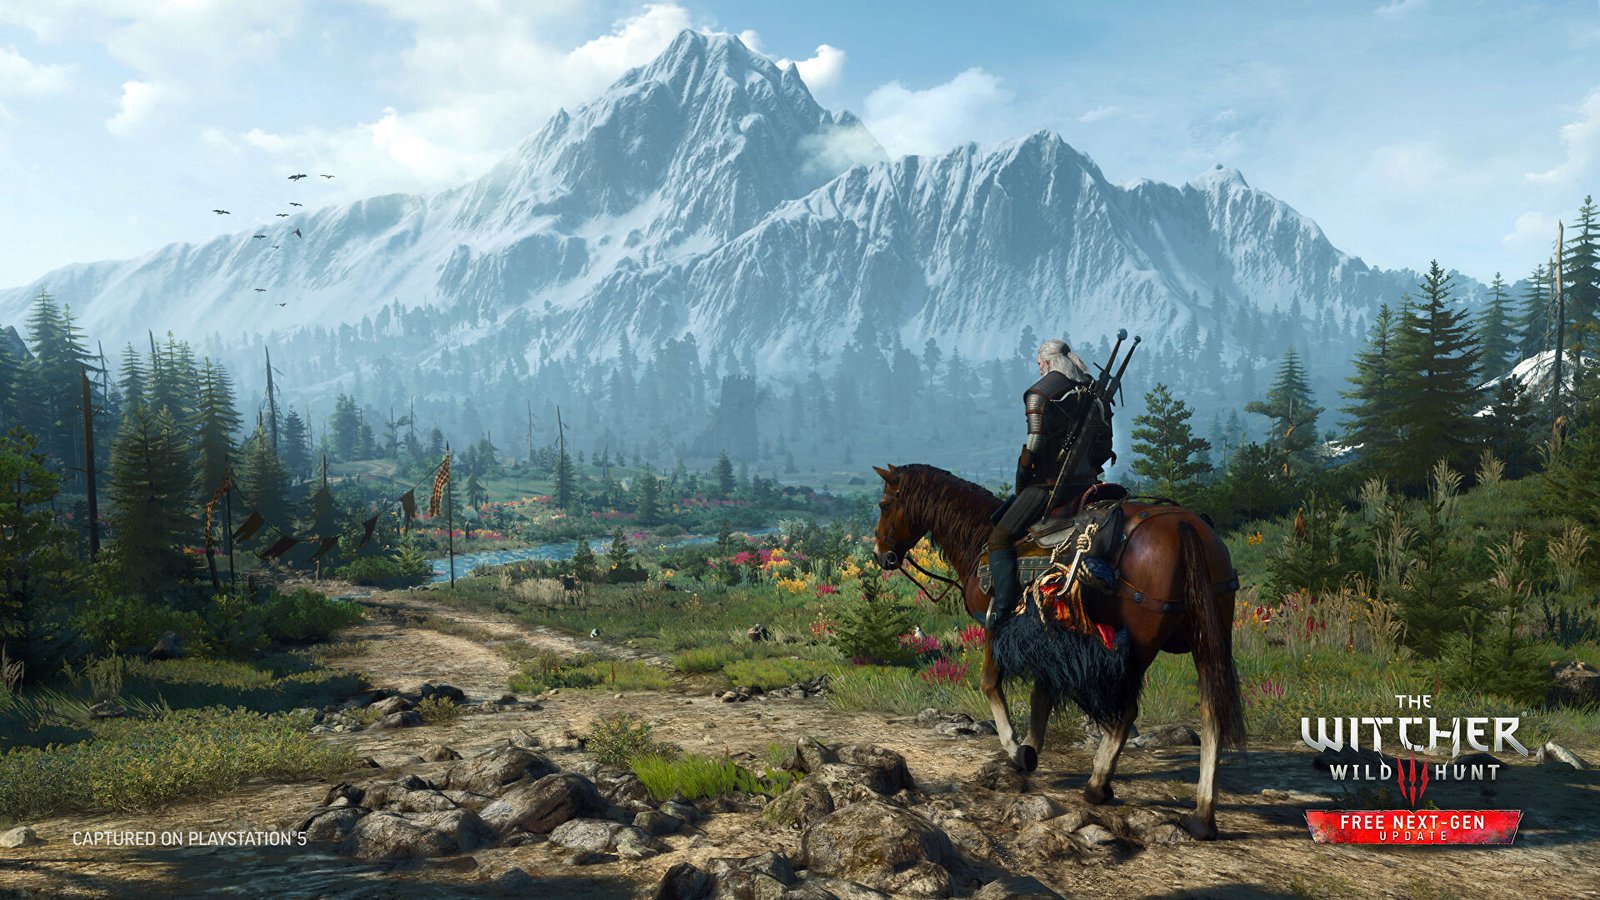 The next-gen update doesn’t transform The Witcher 3, but it does make returning to it a pleasure